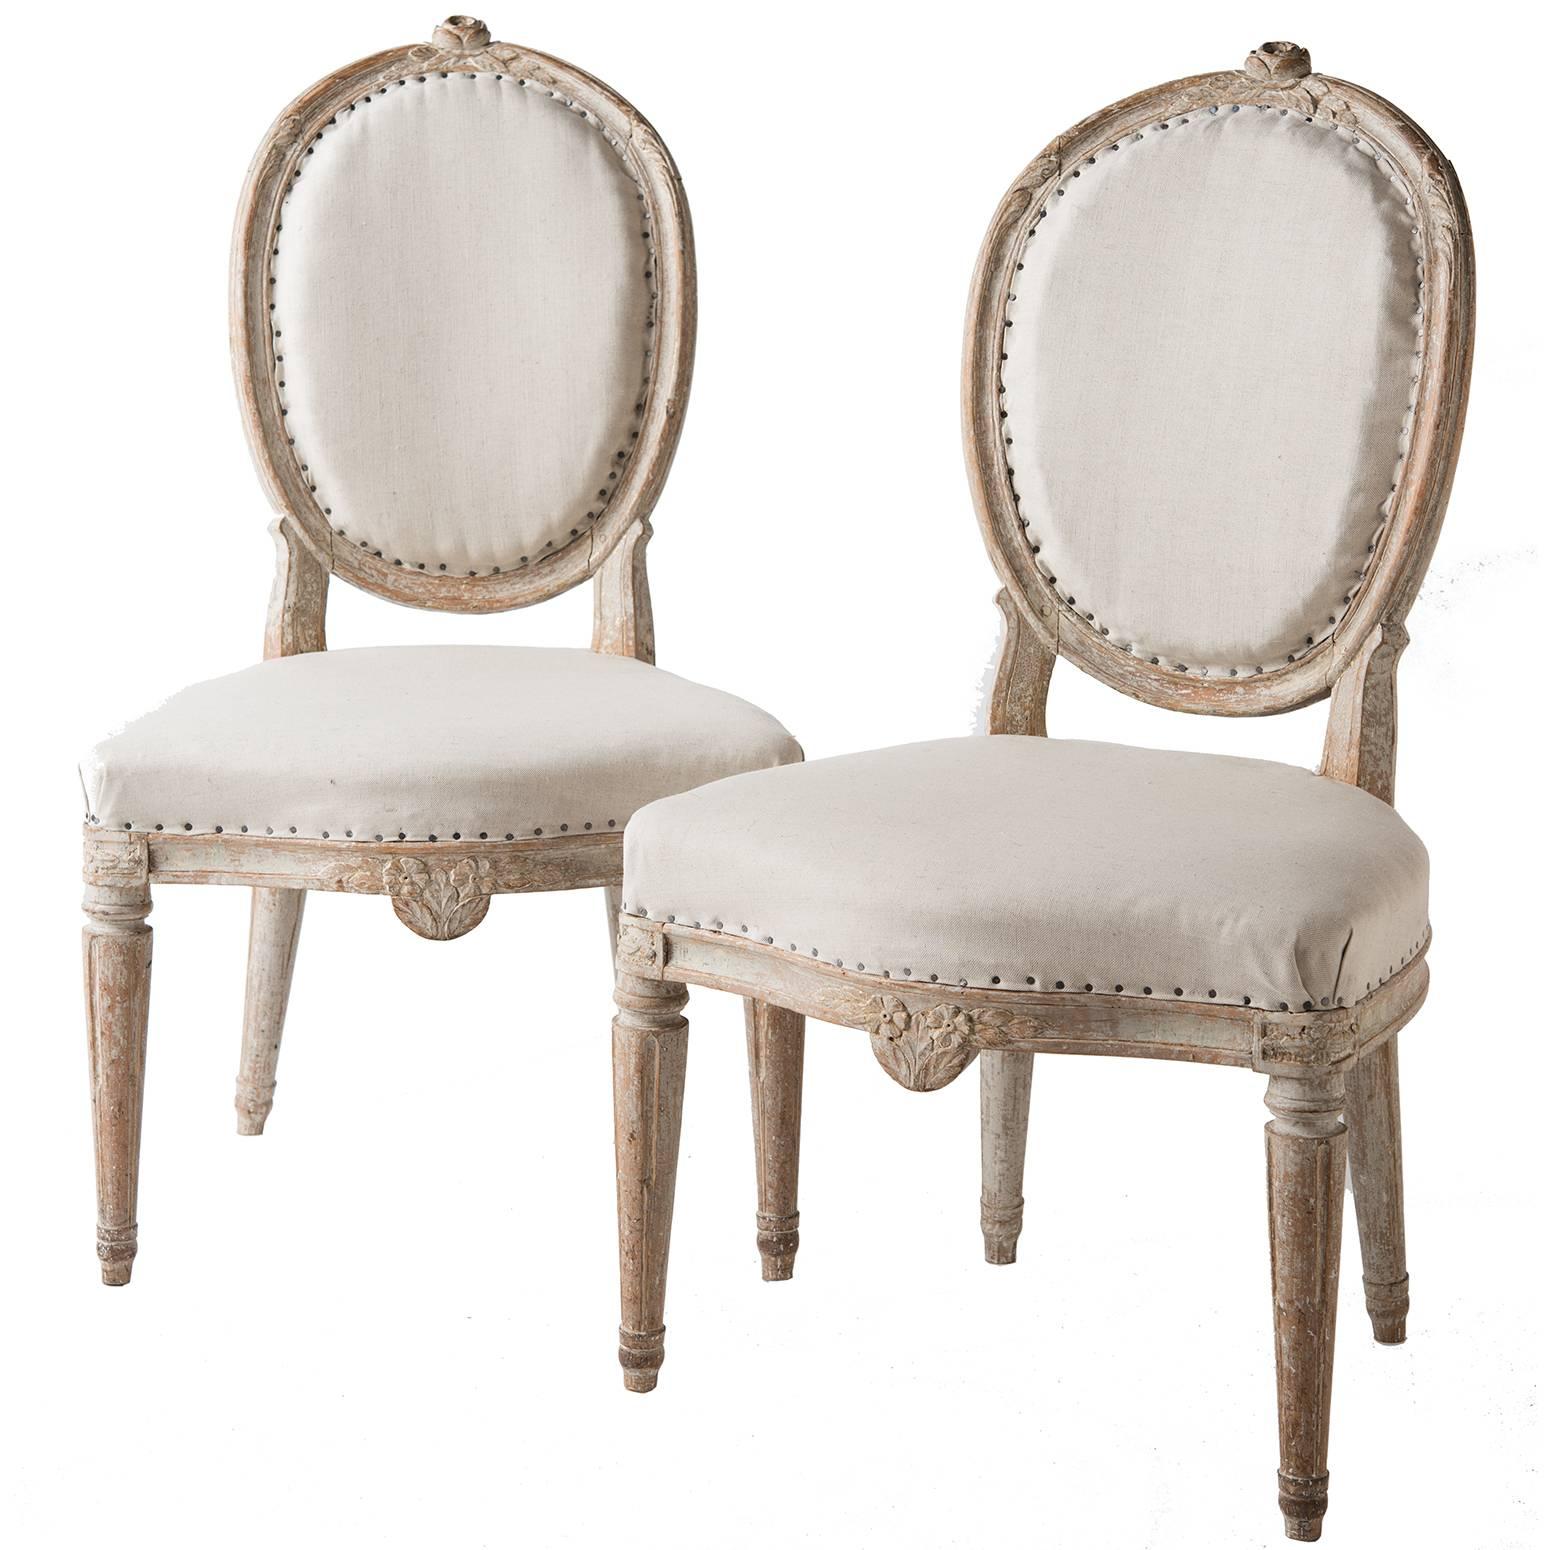 Pair of Gustavian Period Signed Stockholm Side Chairs, circa 1780